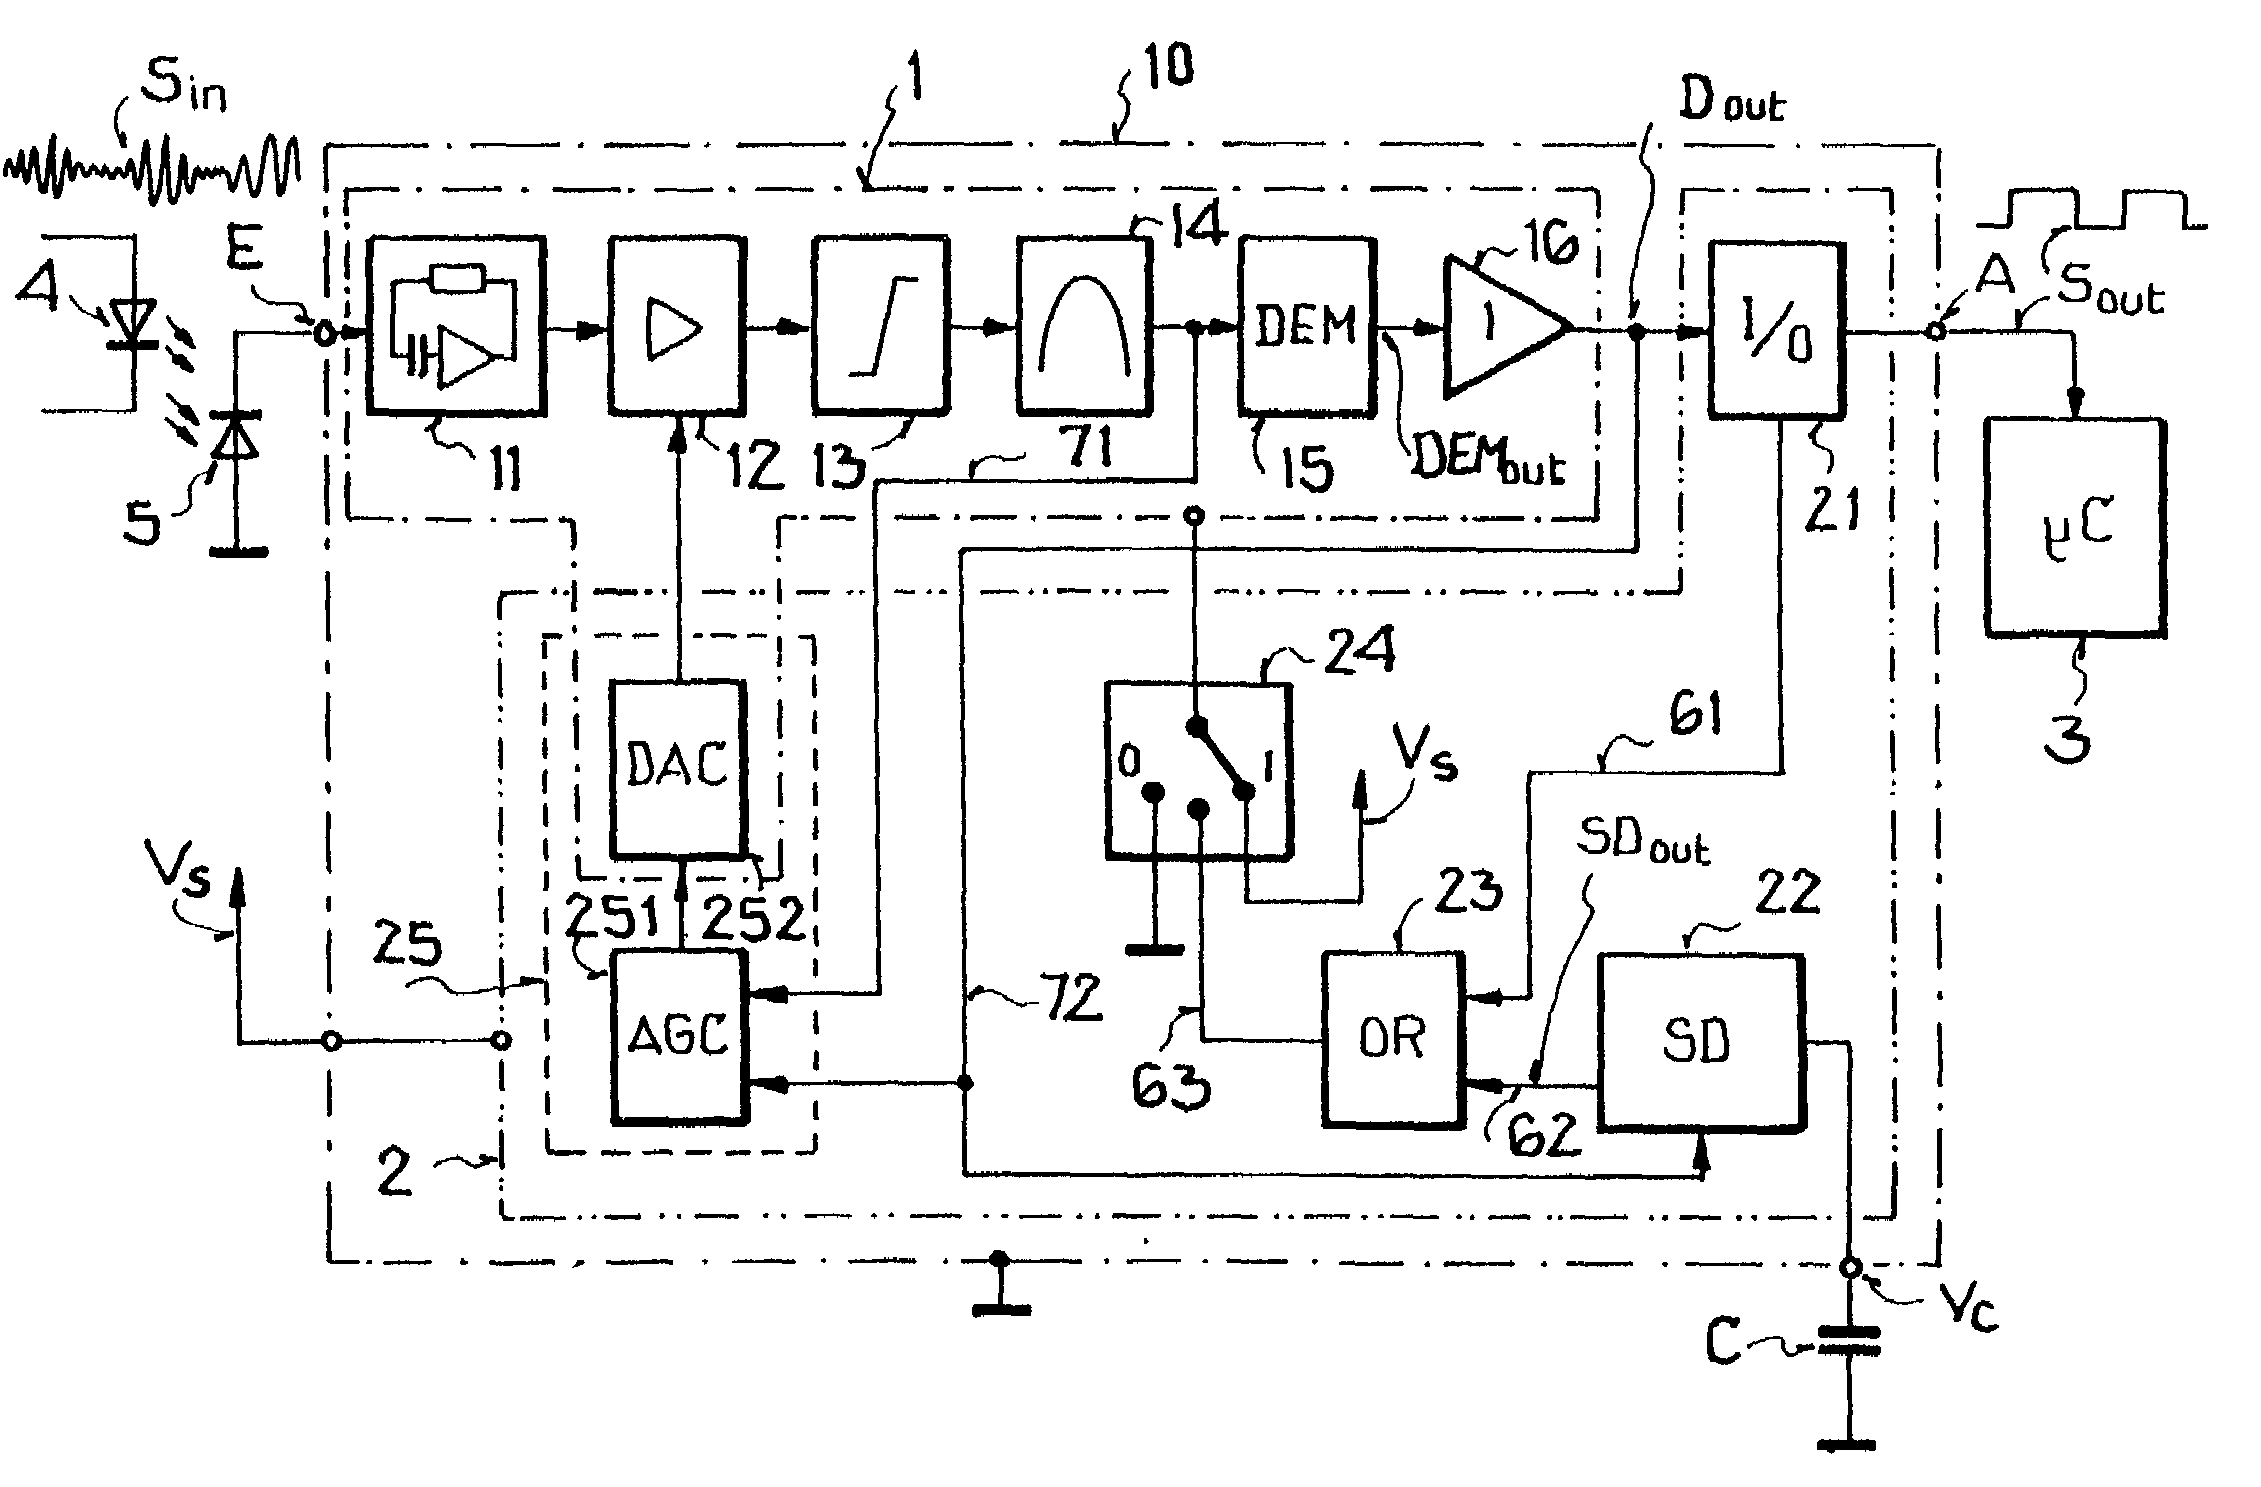 Energy-saving method for the wireless reception of data modulated on a carrier signal